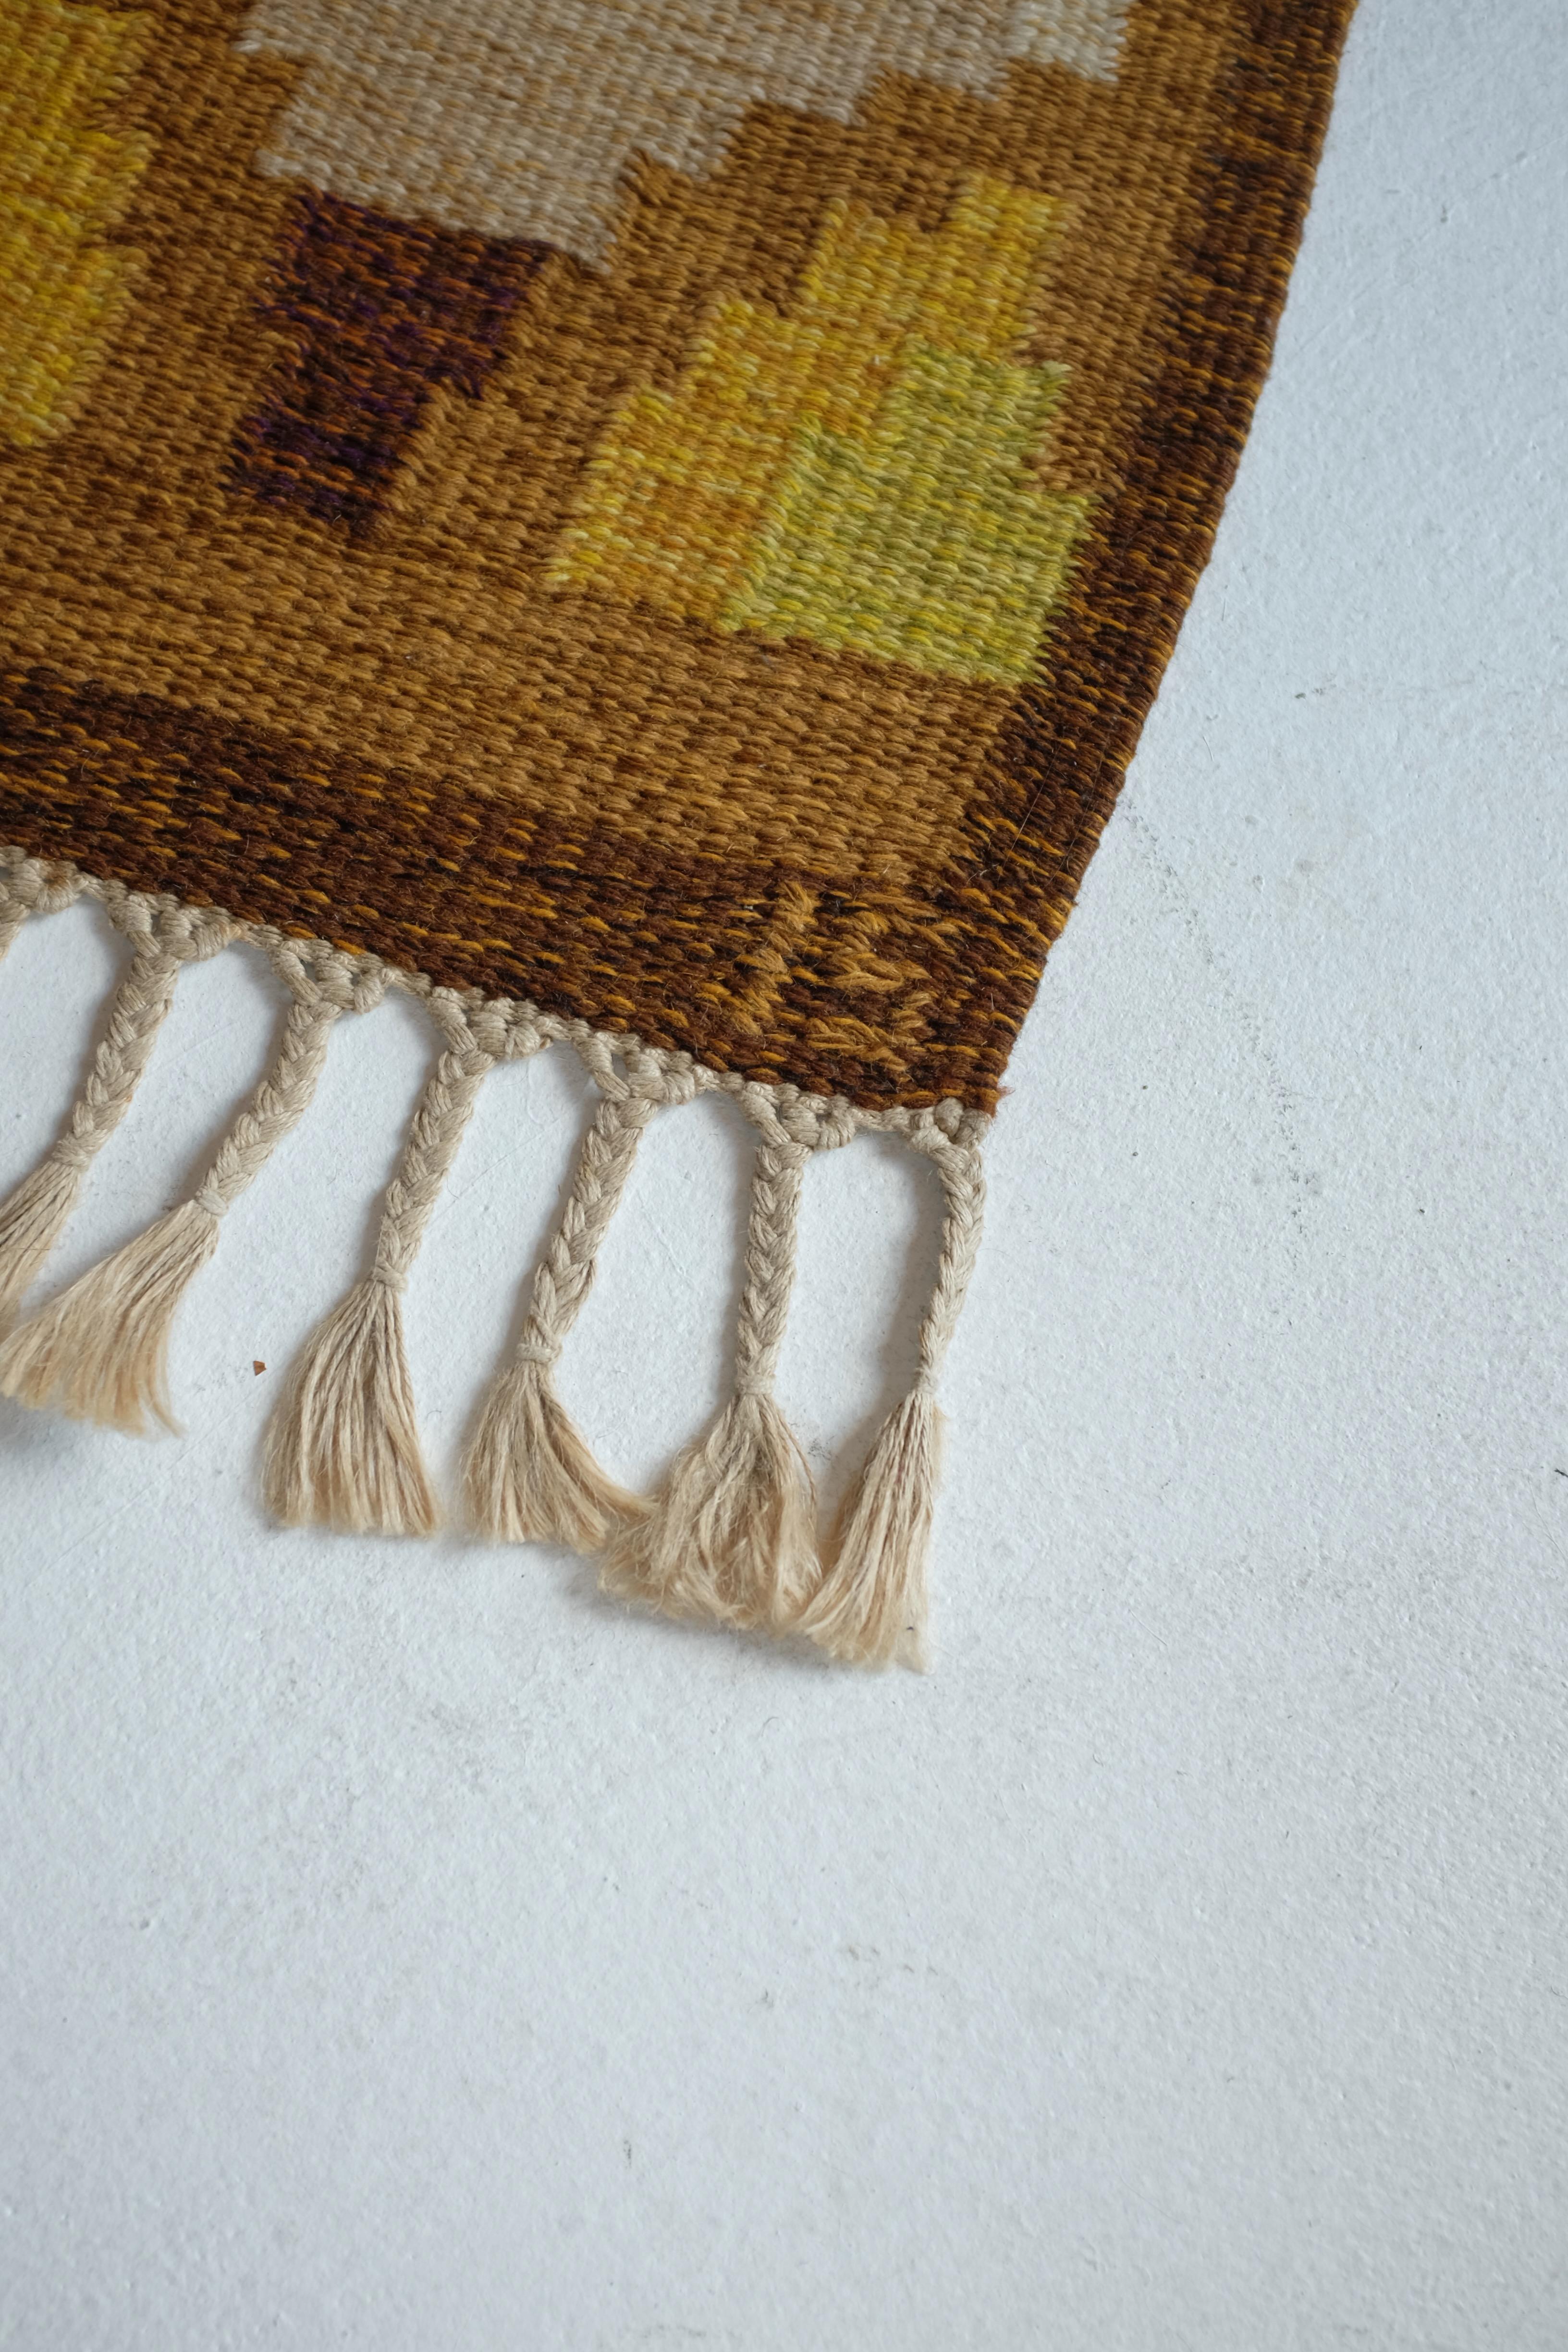 Stunning Vintage Swedish Kilim by Ingegerd Silow. Yellow, brown, light pink and purple shades form a geometric design with neo-classic inspiration. In a very good condition with all fringes intact.

Country: Sweden

Designer: Ingegerd Silow